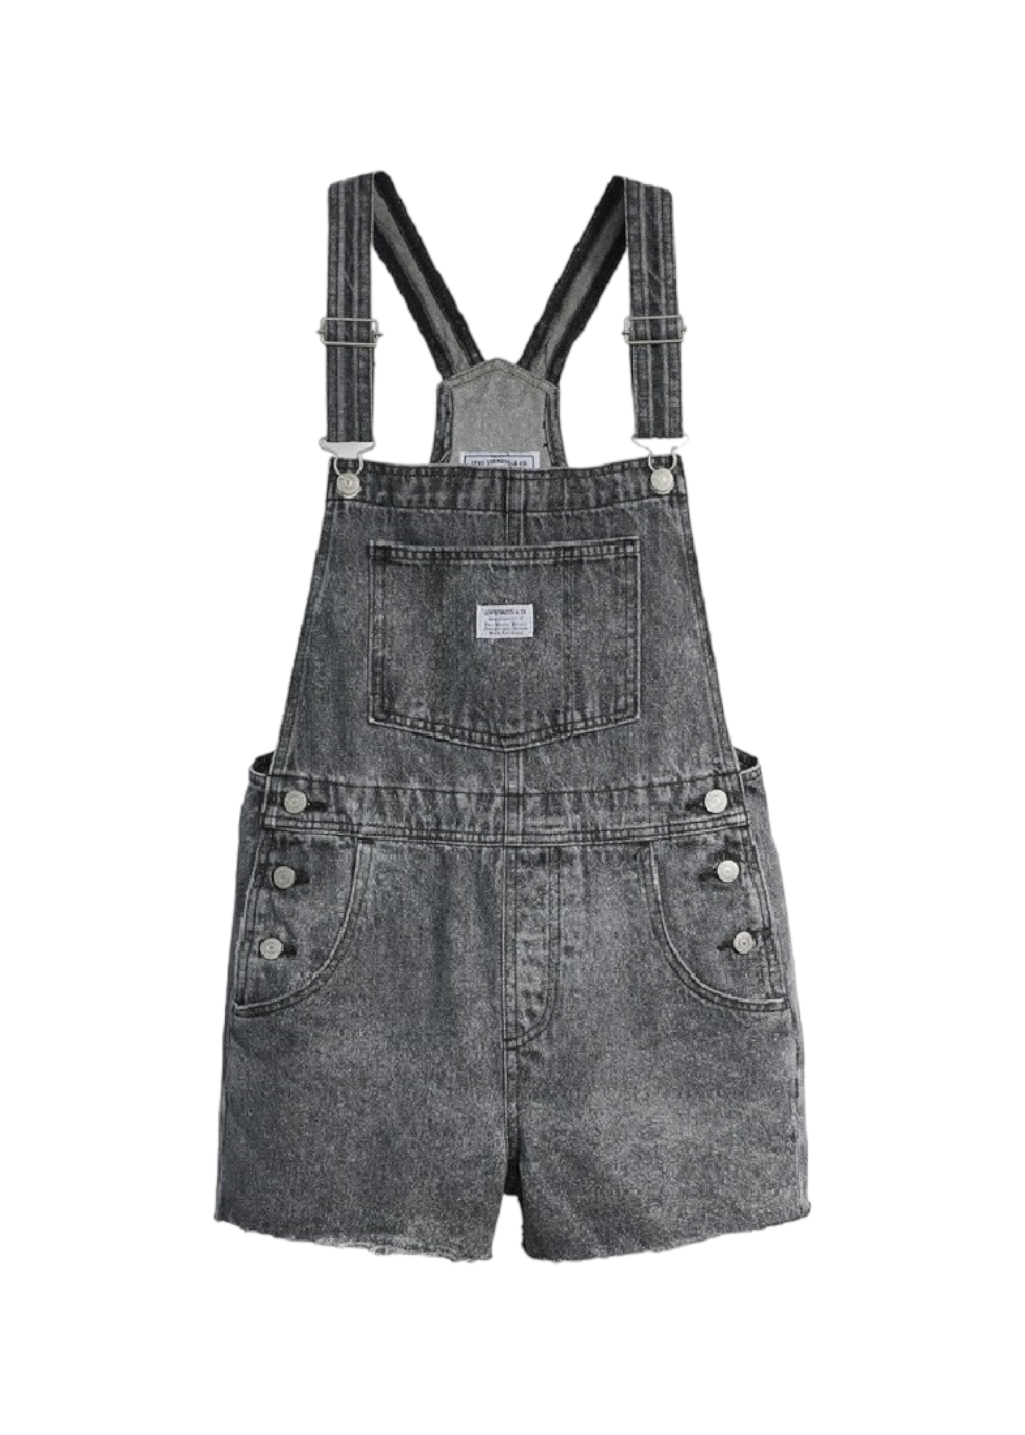 Levi's - Vintage Shortall - Out and About - Hardpressed Print Studio Inc.